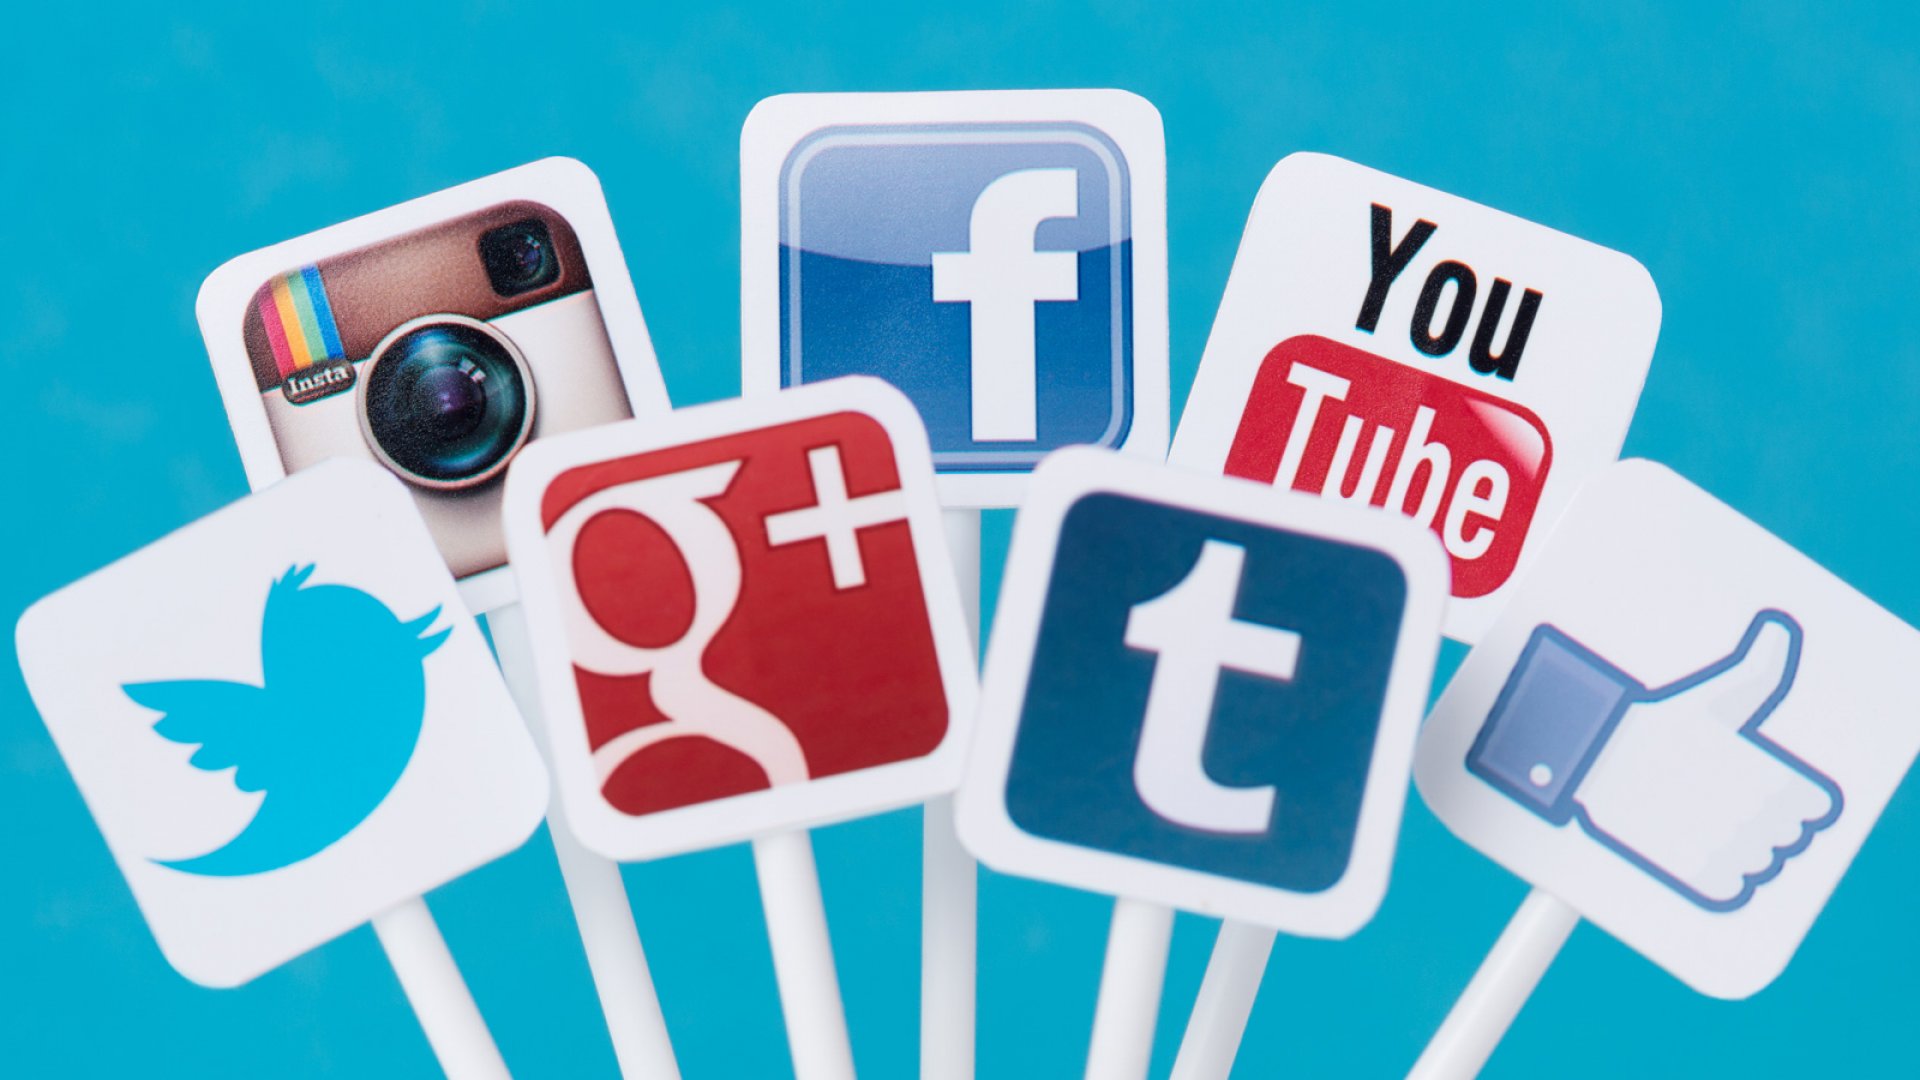 THE BEST SOCIAL MEDIA CHANNELS FOR YOUR BUSINESS